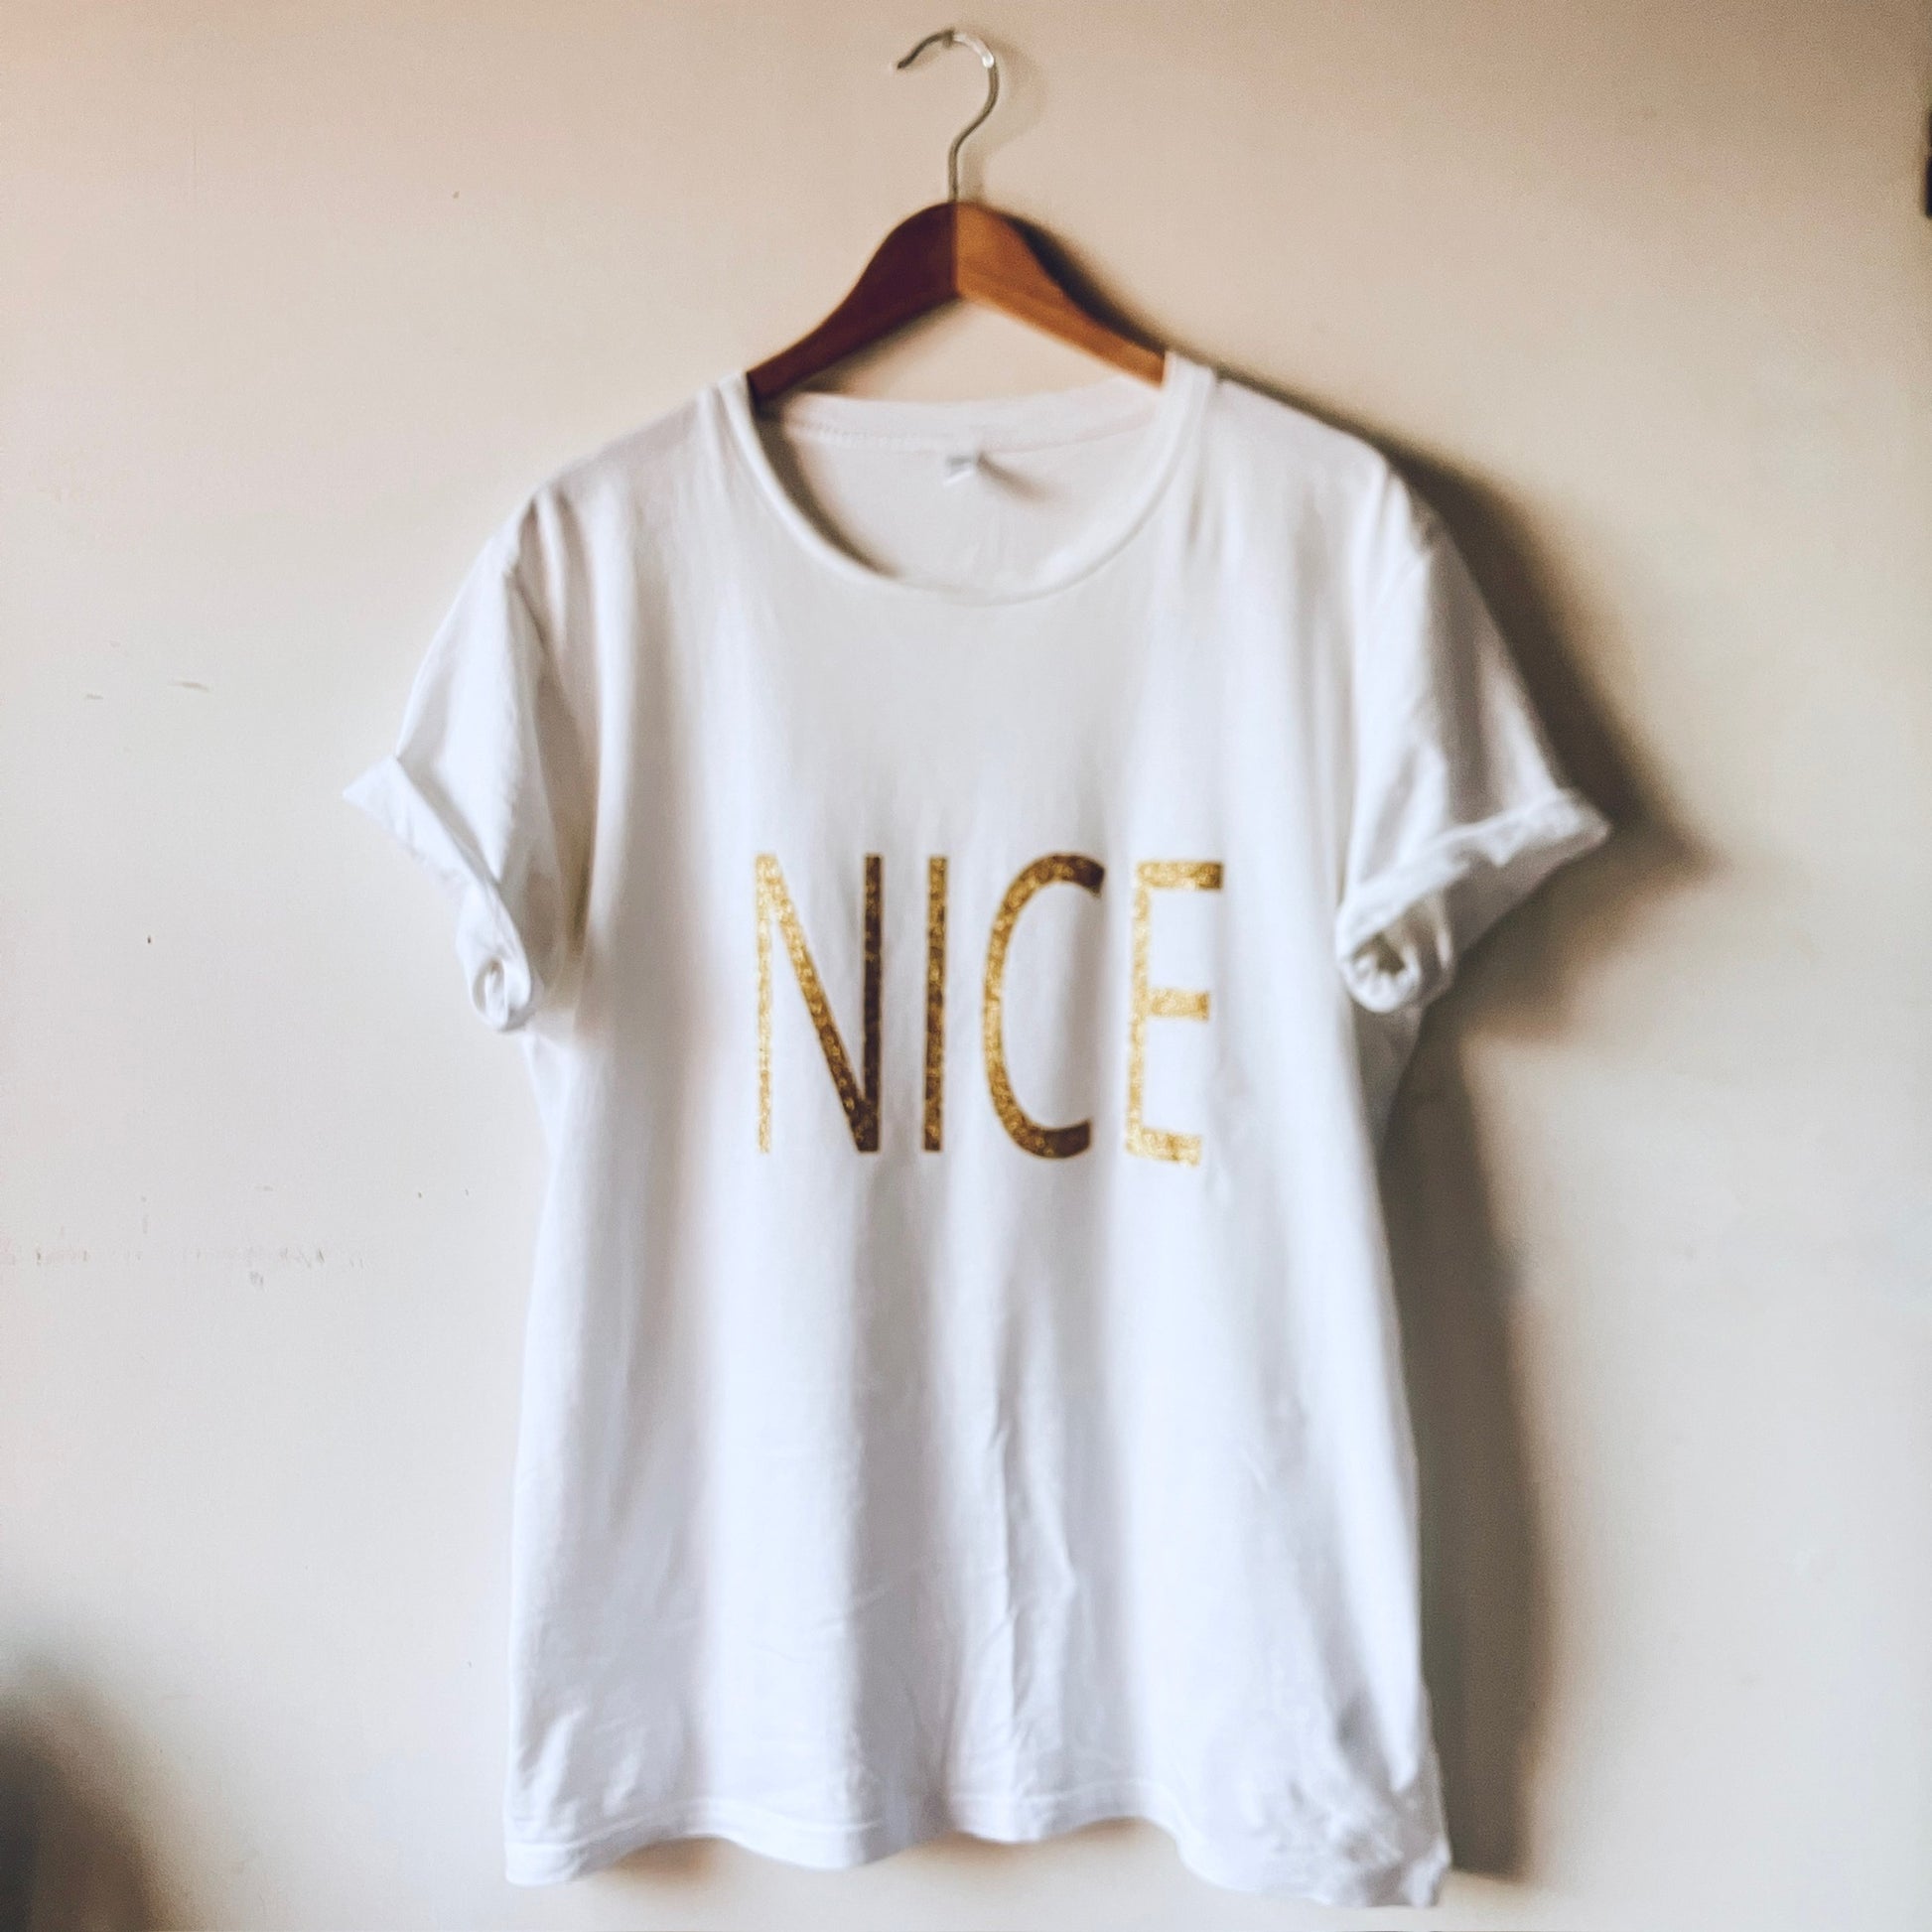 Nice list T-shirt white with gold glitter word 'NICE'